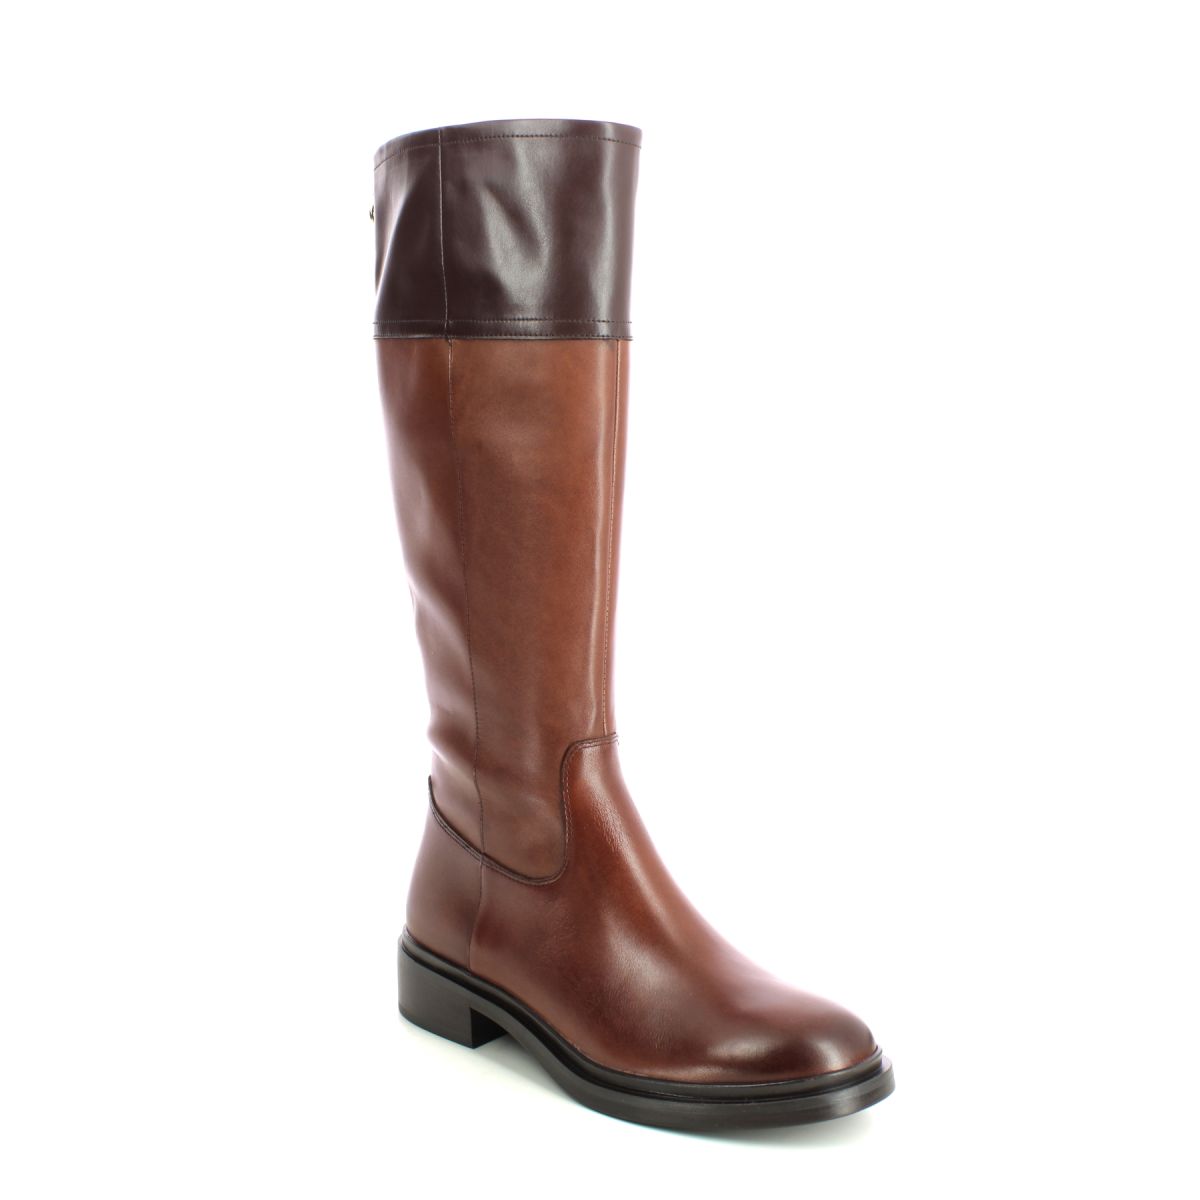 Tamaris Eirini Long Tan Leather Womens knee-high boots 25540-41-392 in a Plain Leather and Man-made in Size 39